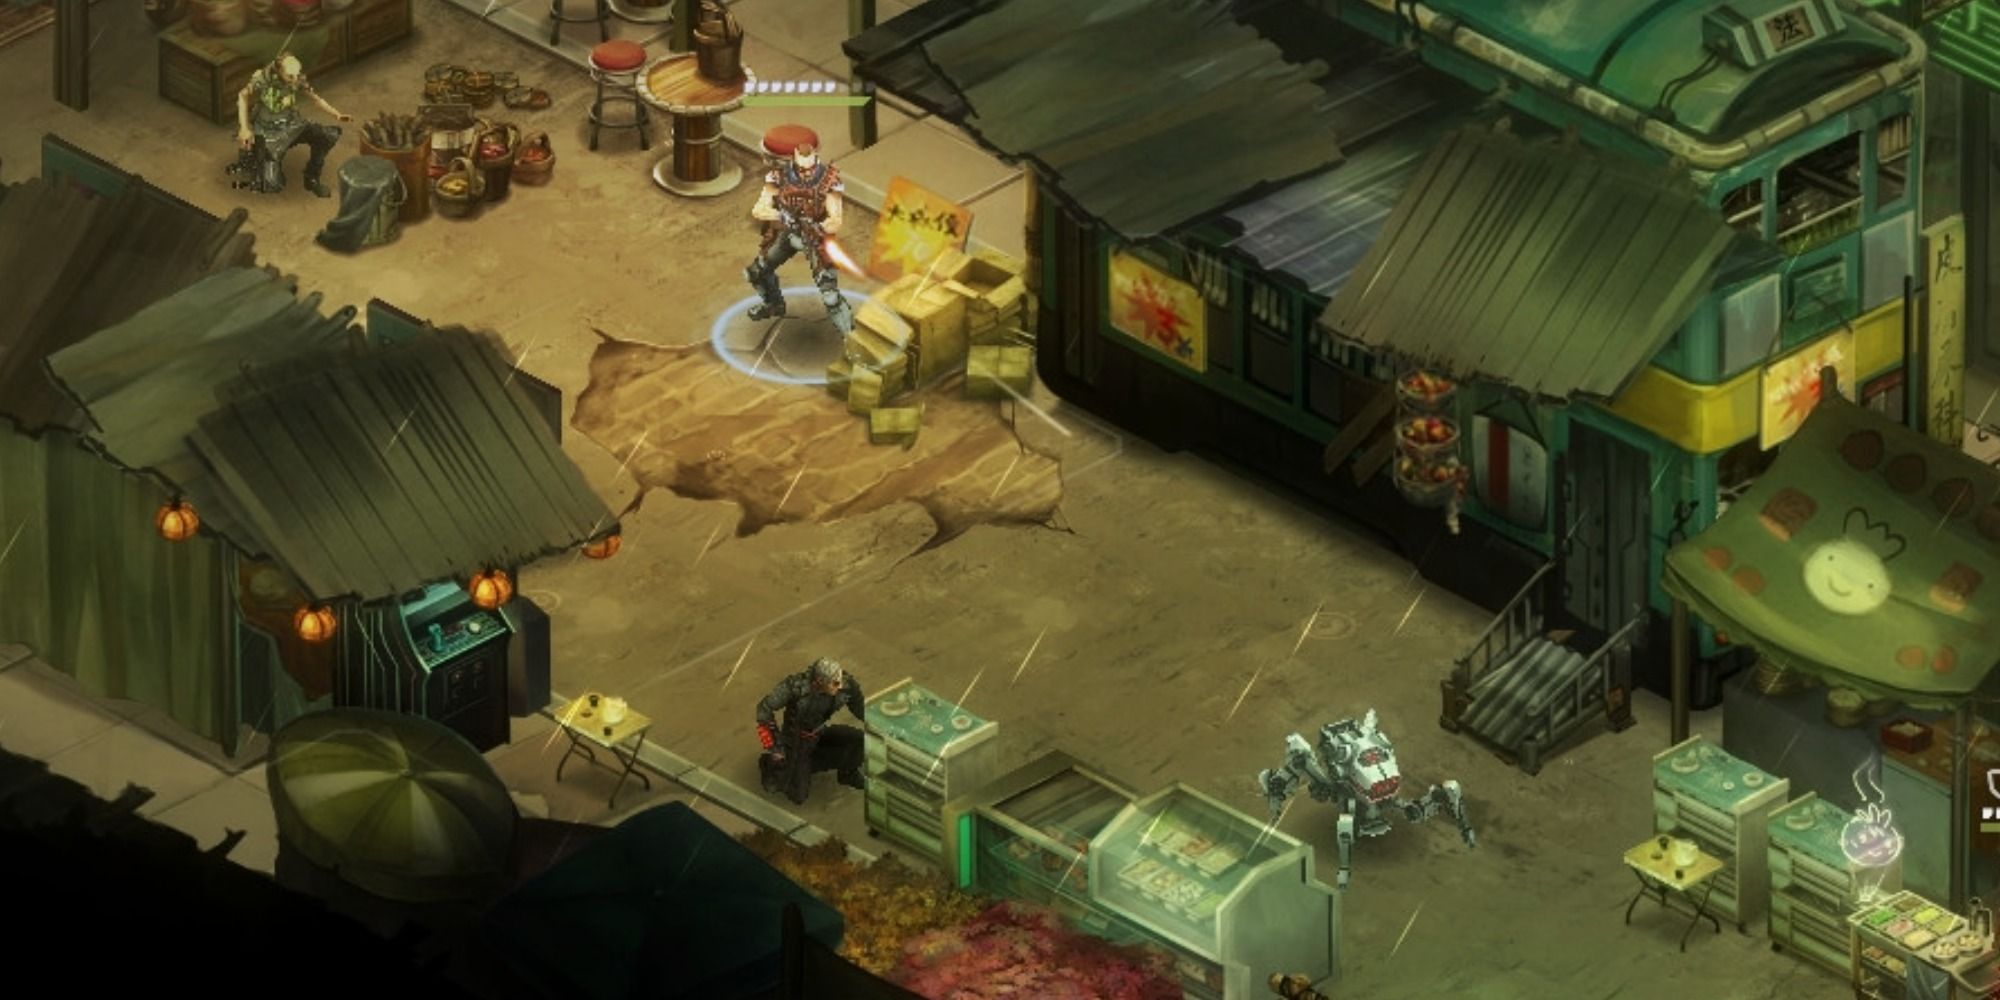 Shadowrun Shootout with a Drone